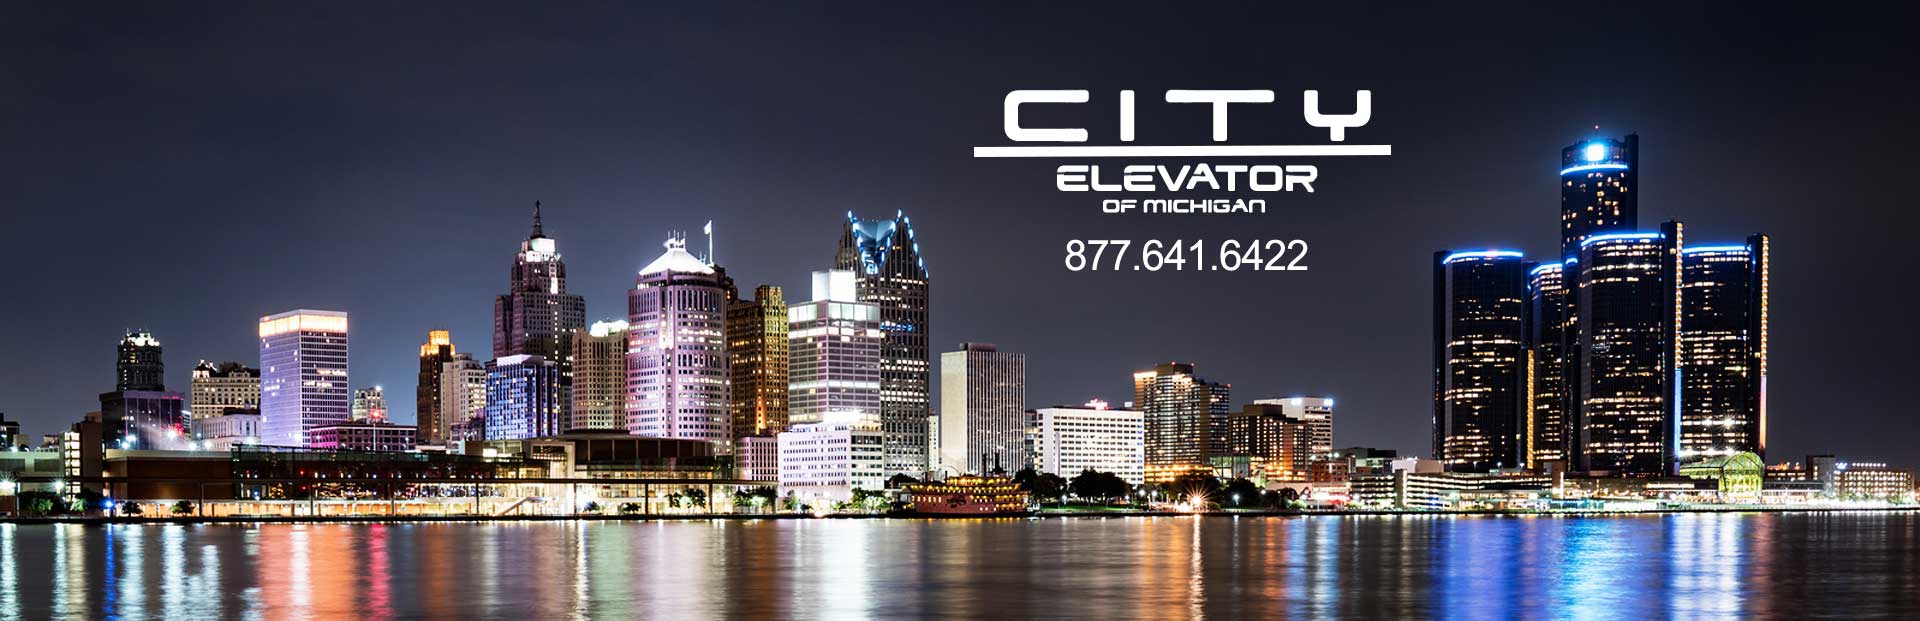 Elevator service for detroit michigan and vicinity